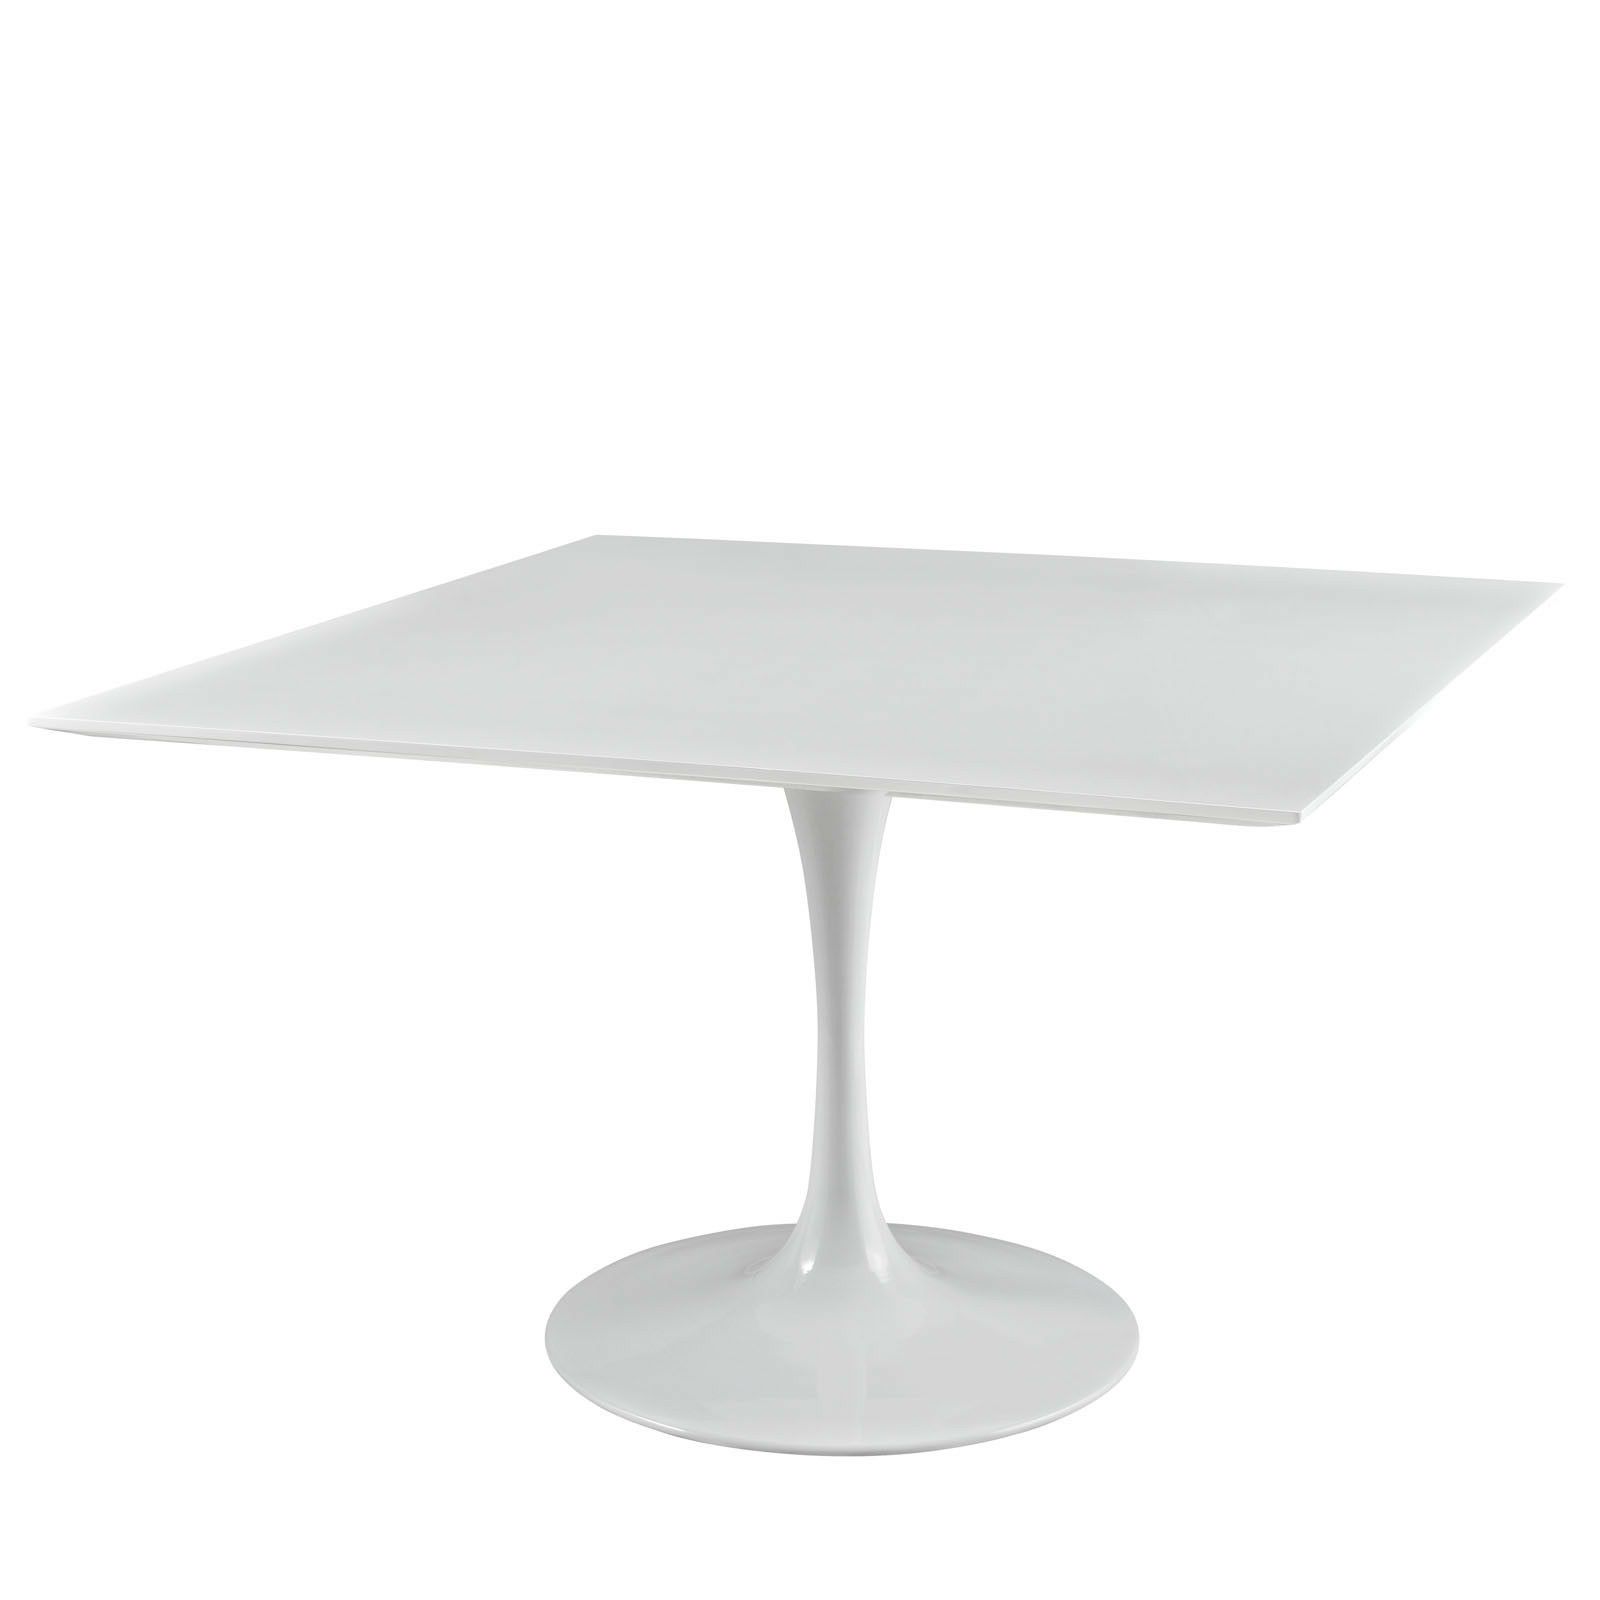 Popular Mid Century Modern 47" Square White Wood Top Metal For Wilkesville 47'' Pedestal Dining Tables (View 6 of 20)